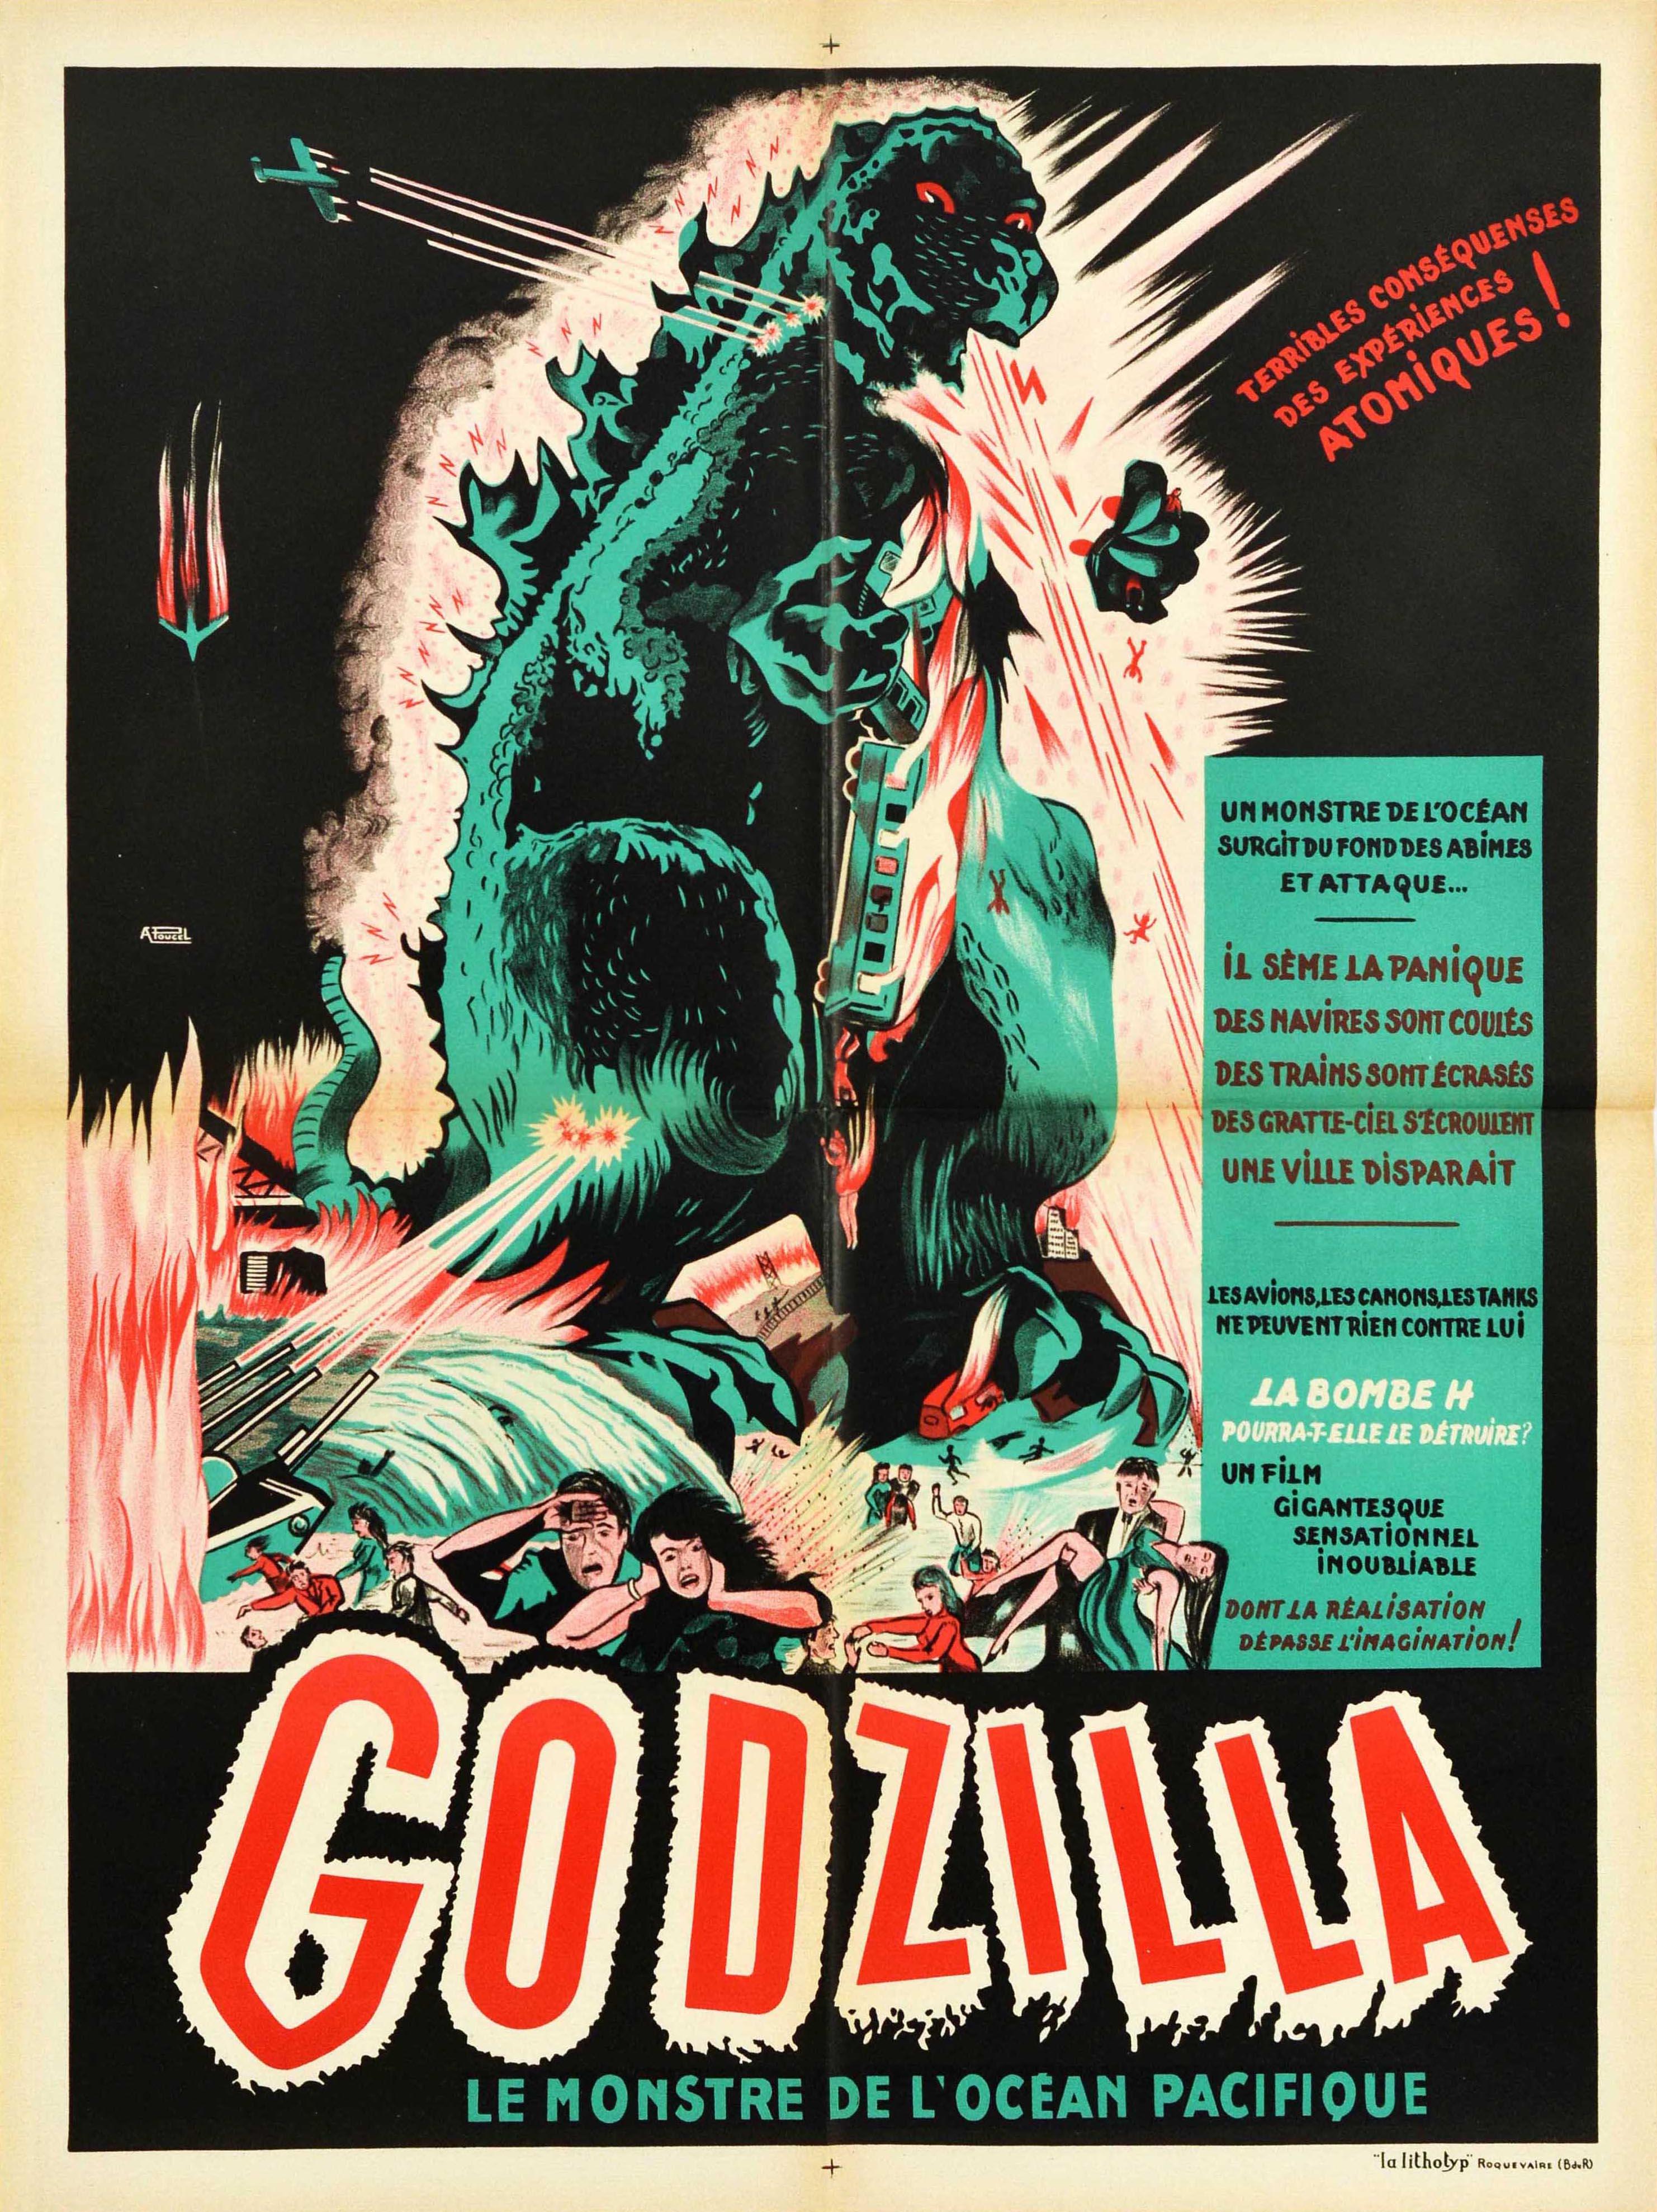 Unknown Print - Original Vintage Movie Poster Godzilla French Science Fiction Action Horror Film